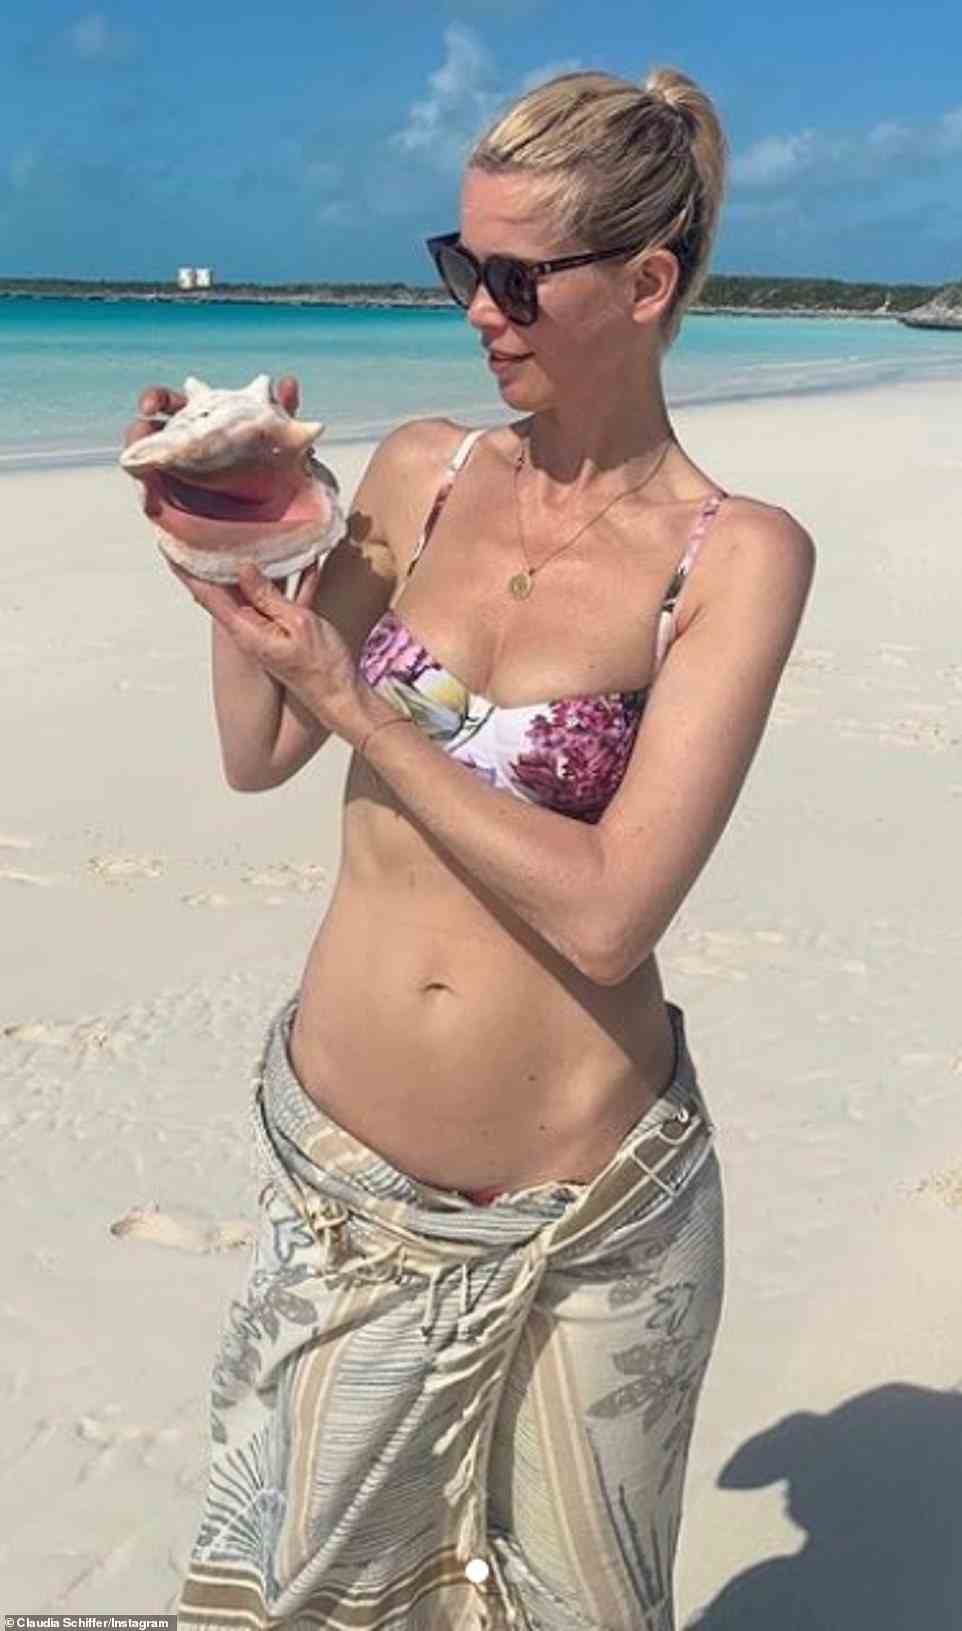 Claudia Schiffer, 51, proved she still had it when she shared a few photos in a floral bikini back in June. The sexy snaps showed her standing on a tropical beach in a white a pink flowered bathing suit, while holding a shell